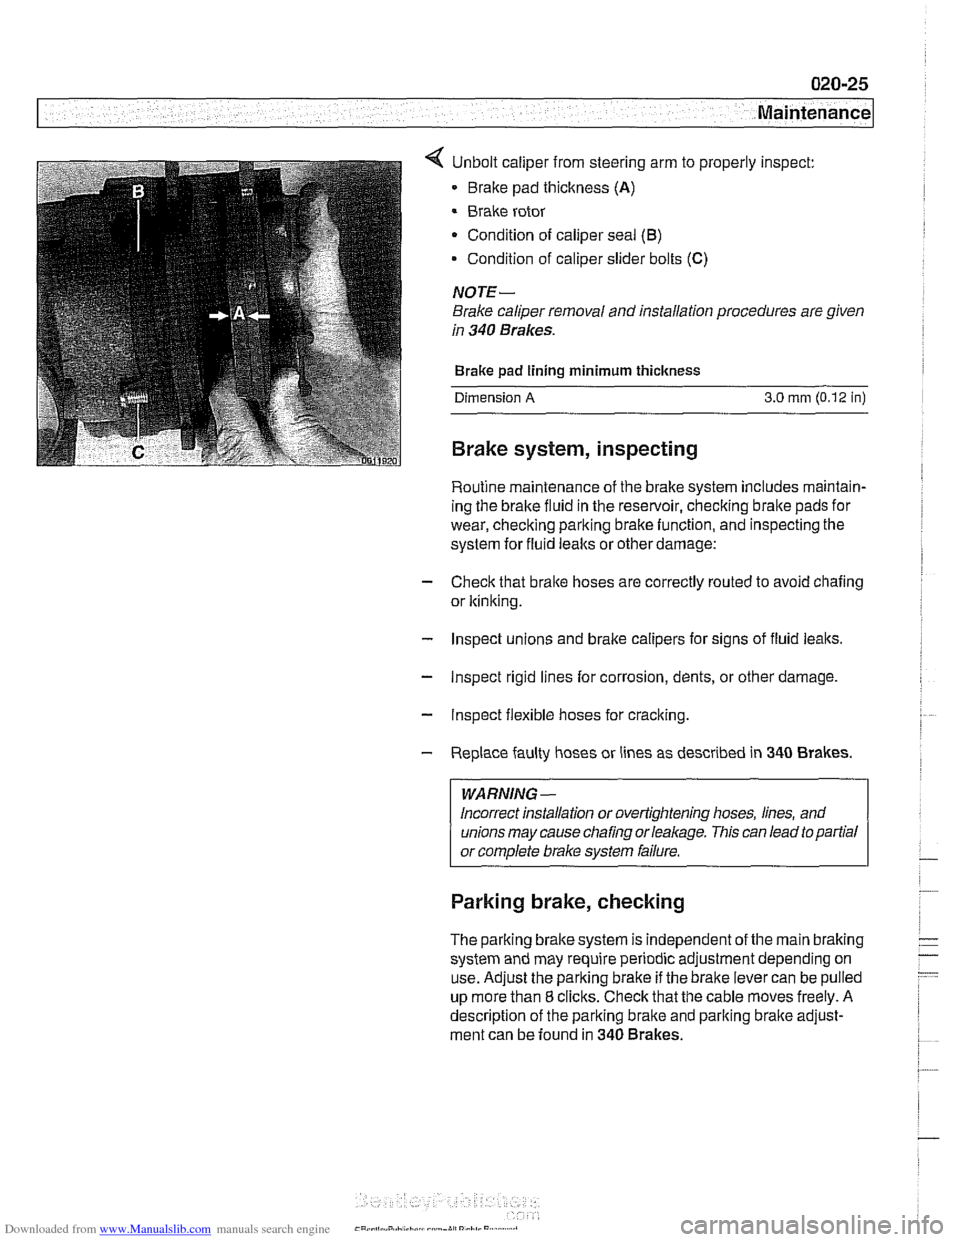 BMW 540i 1998 E39 Workshop Manual Downloaded from www.Manualslib.com manuals search engine 
7 Maintenance 
< Unbolt caliper from steering arm  to properly  inspect: 
Brake  pad thickness 
(A) 
Brake rotor 
Condition  of caliper seal 
